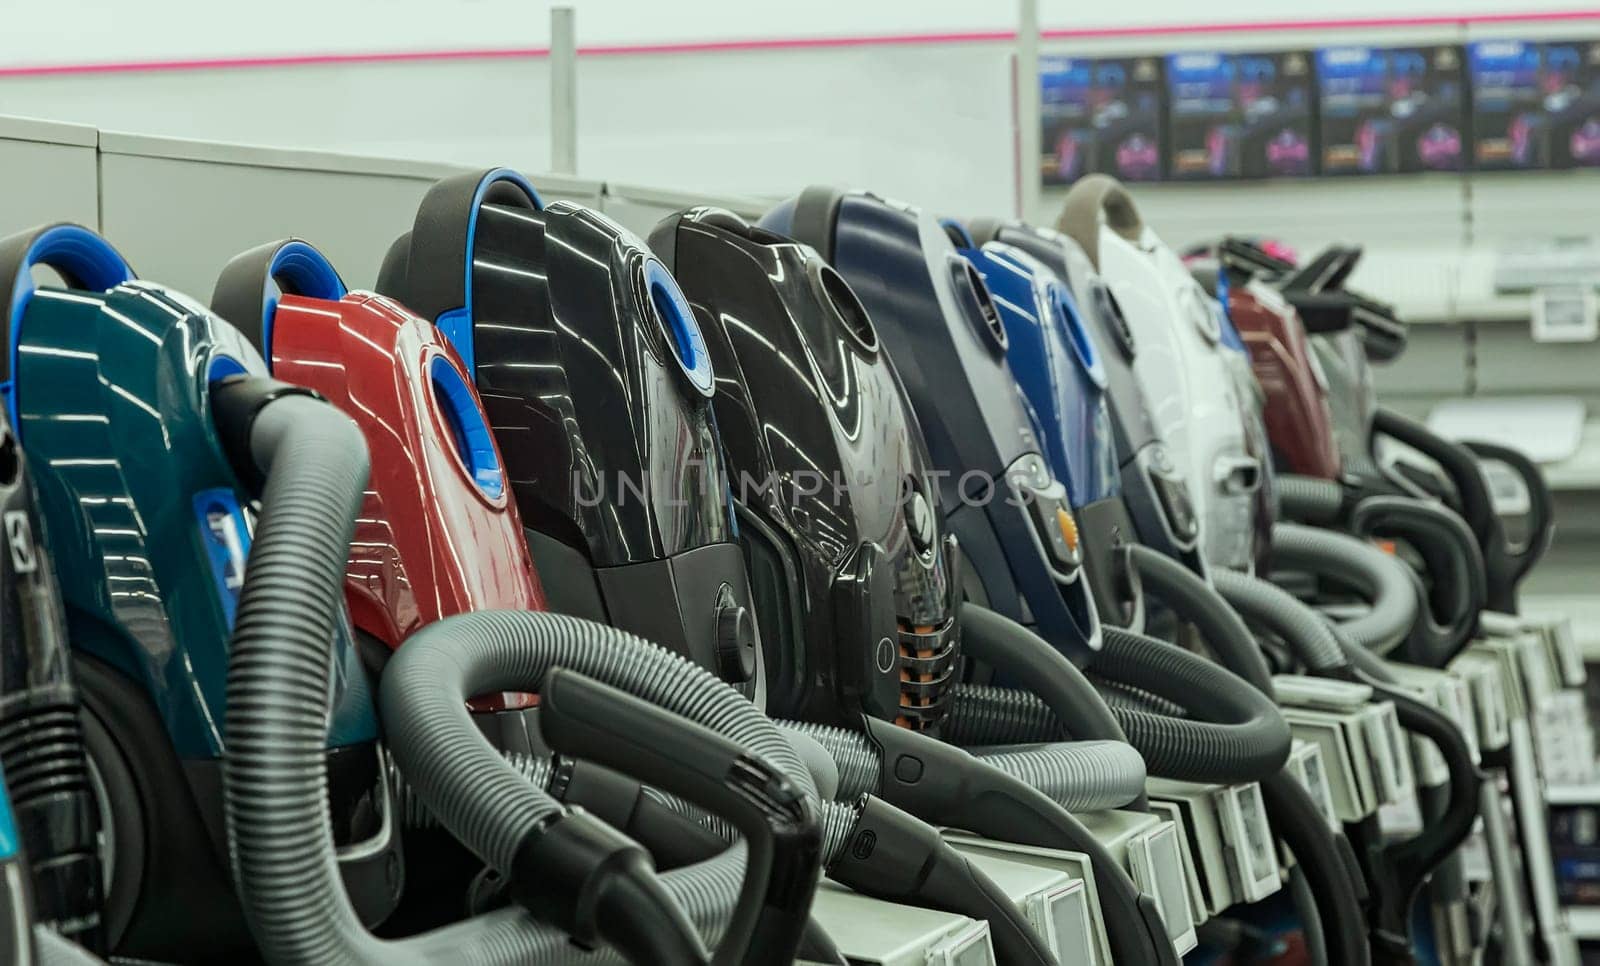 Appliances store presents for sale modern vacuum cleaners from different manufacturers..